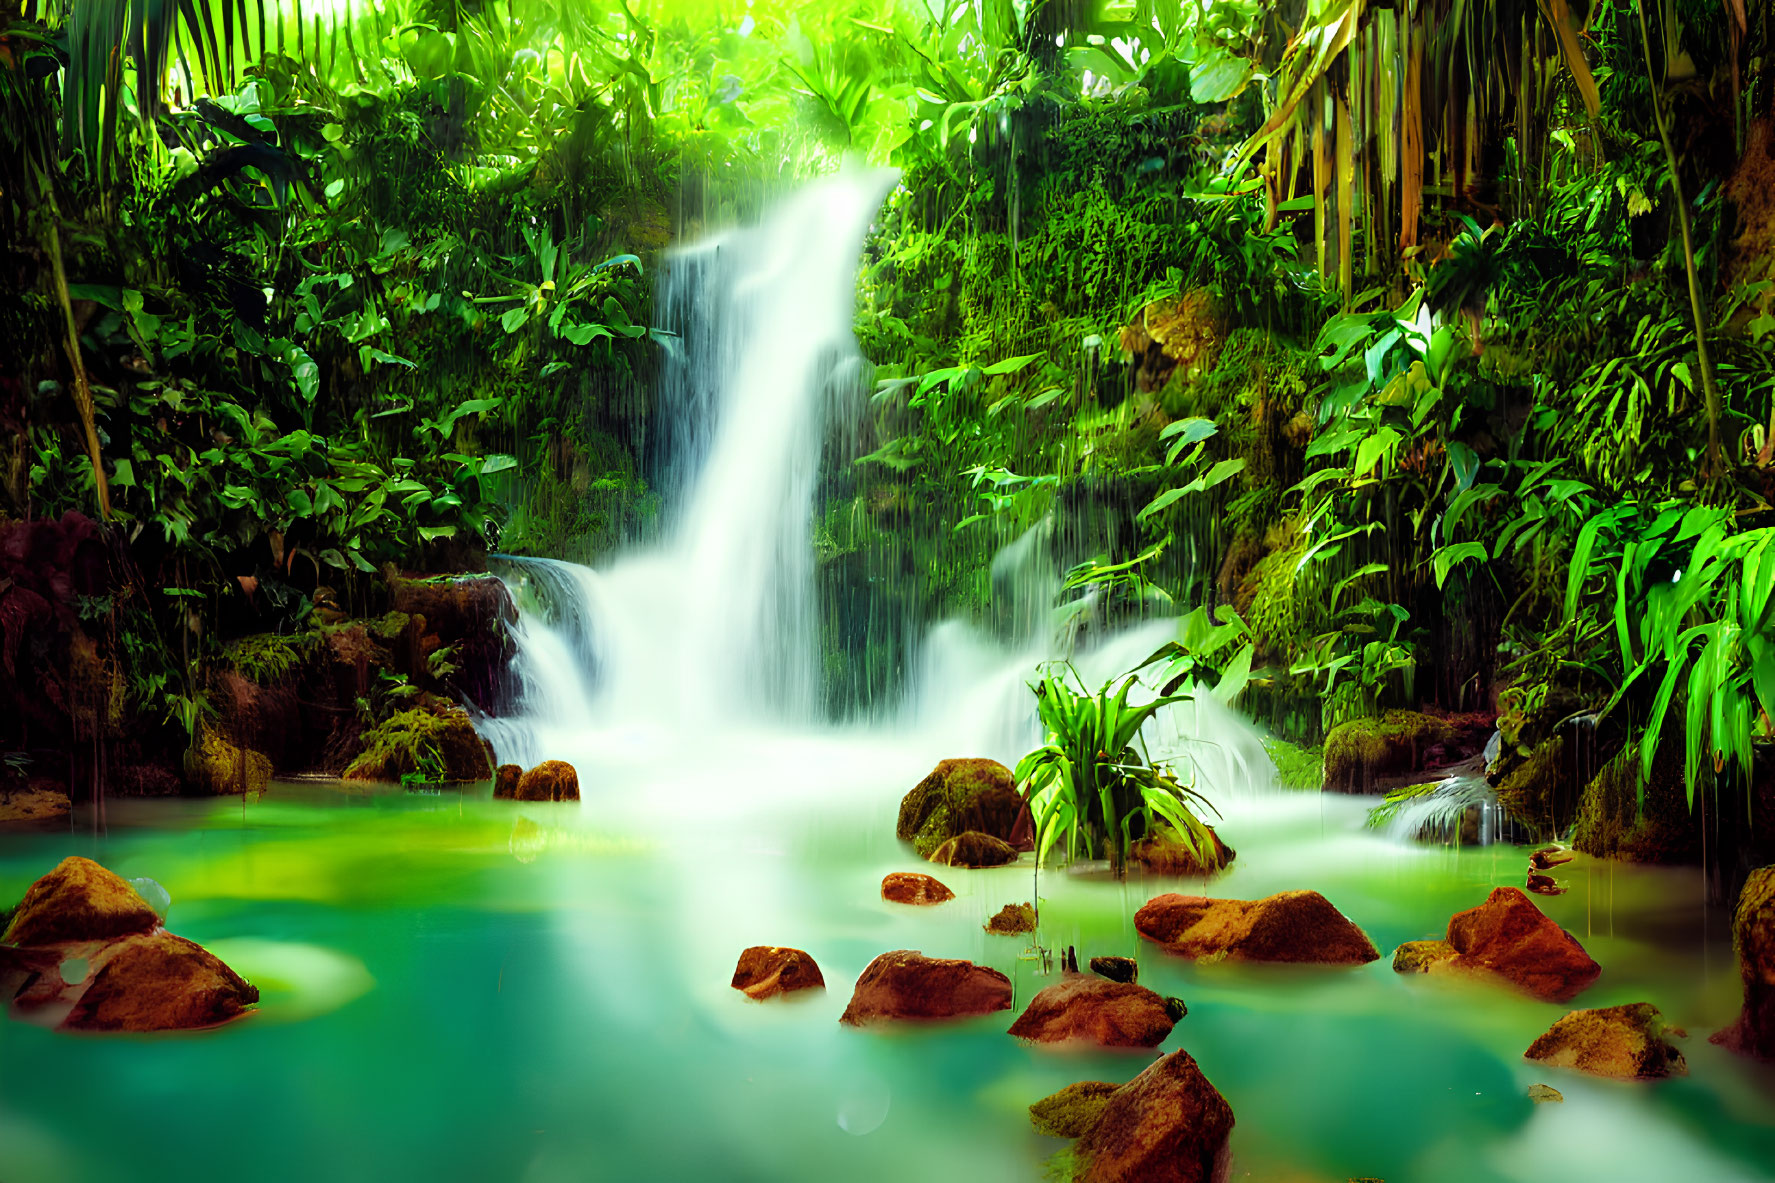 Tranquil tropical waterfall surrounded by lush greenery and bamboo trees